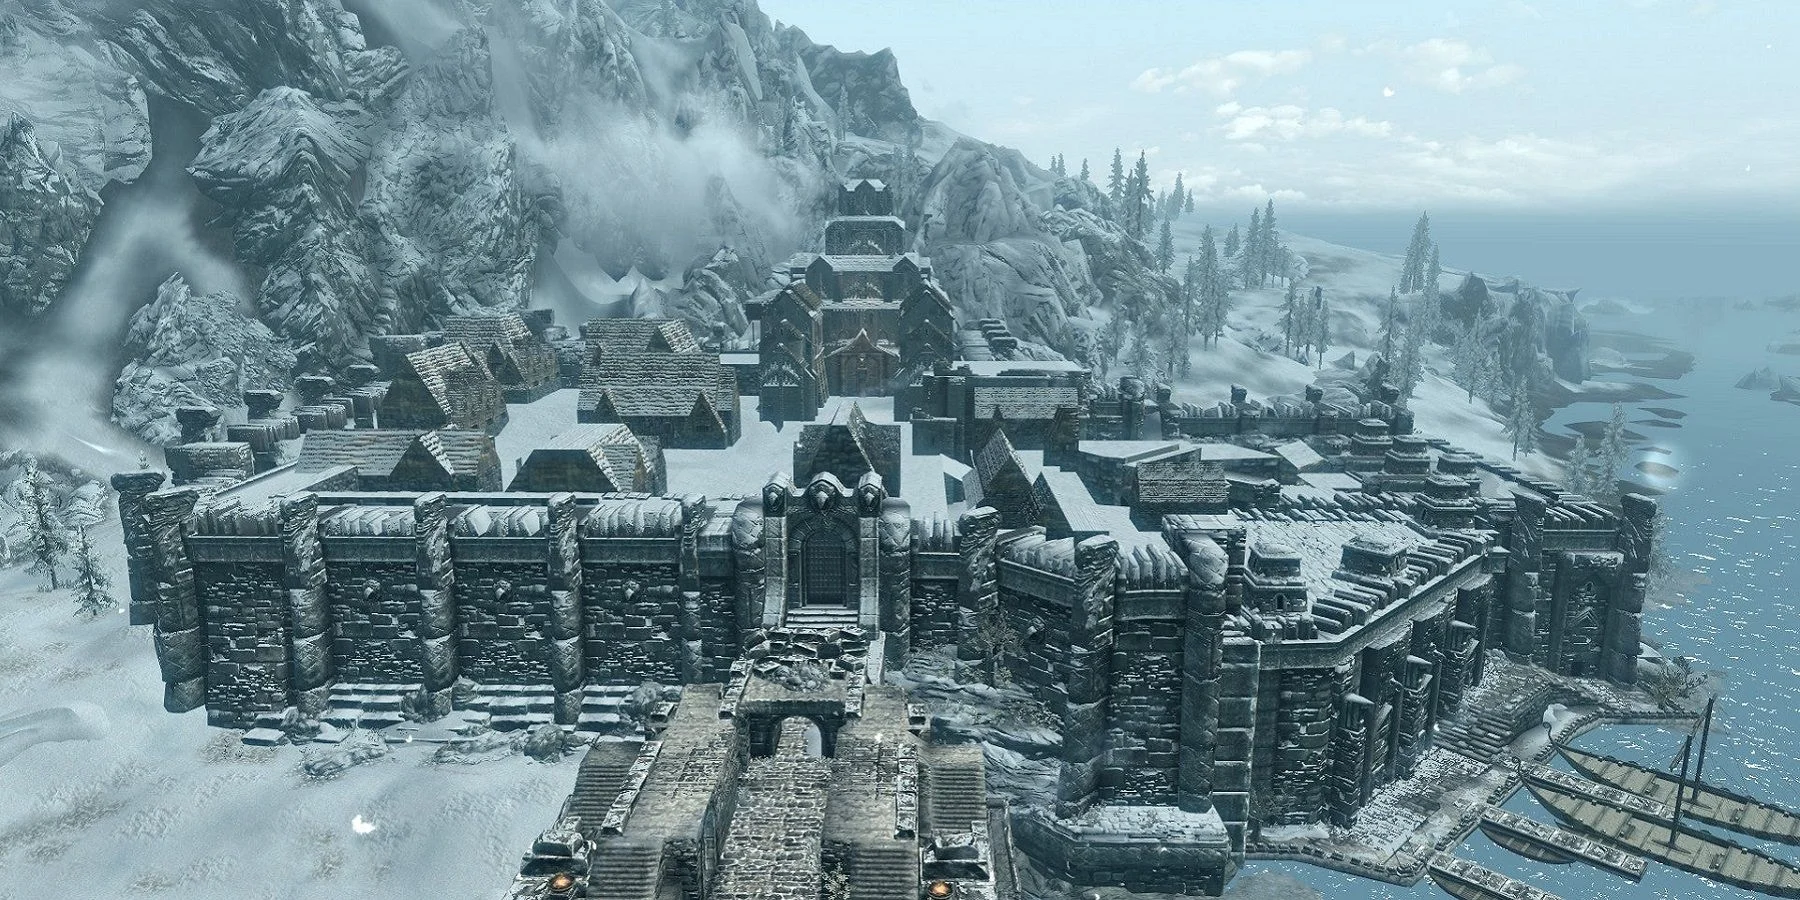 Why Skyrim's Cities Are Still a Hot Topic: Fans Can't Agree on the Best One Even After 11 Years